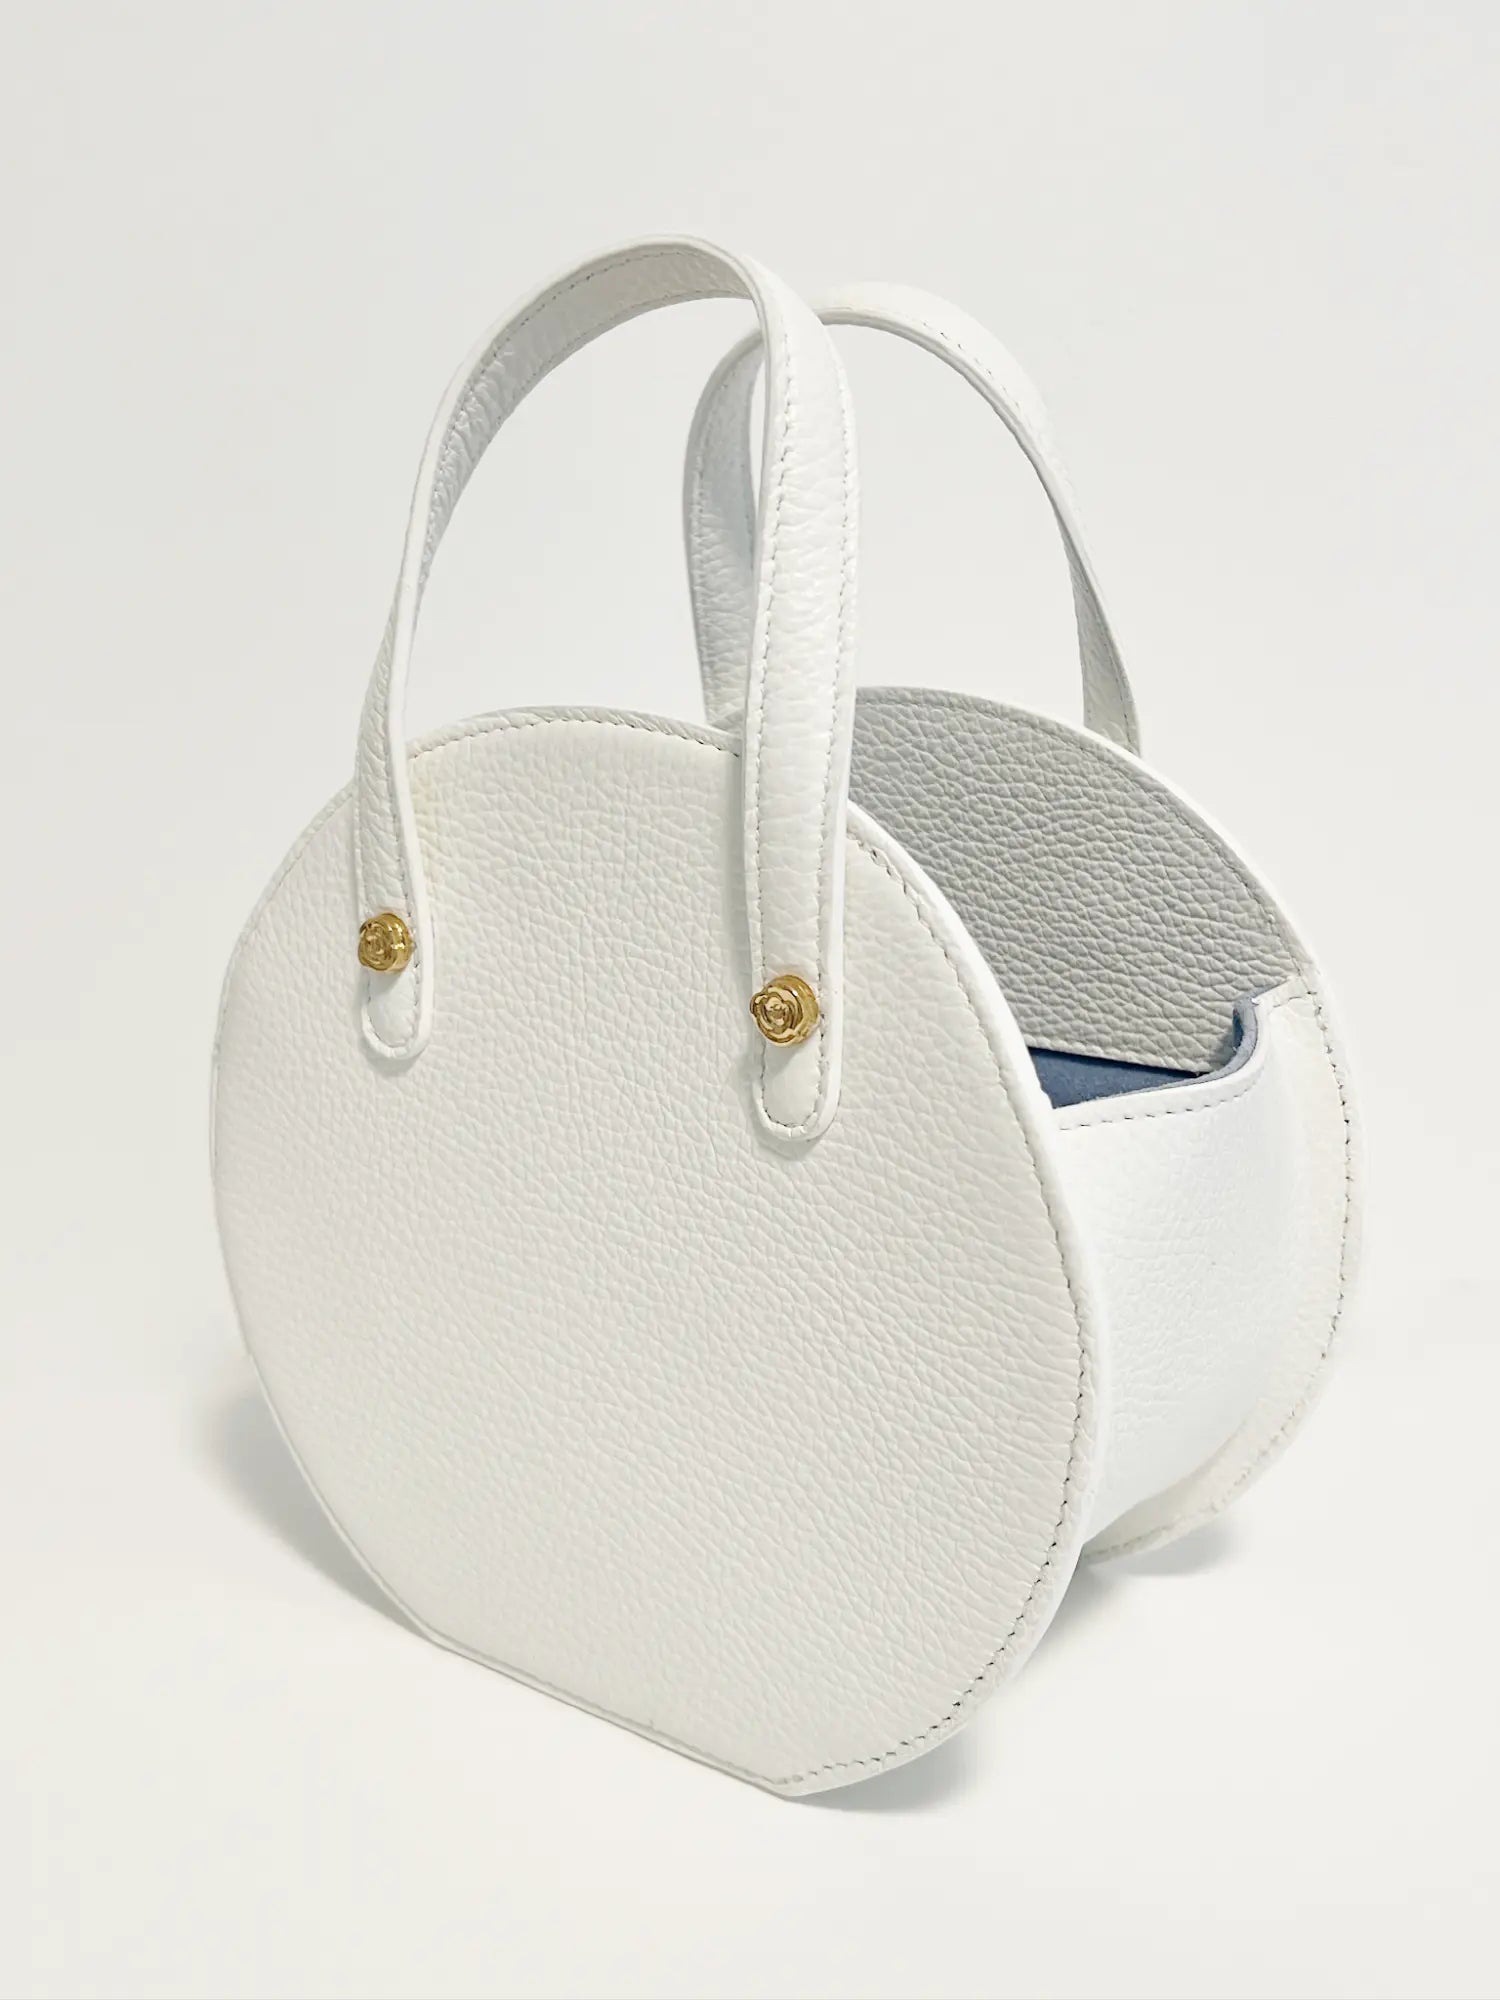 White round Harper Hat Box Handbag in Italian leather with short straps on a plain background from The Bella Rosa Collection.